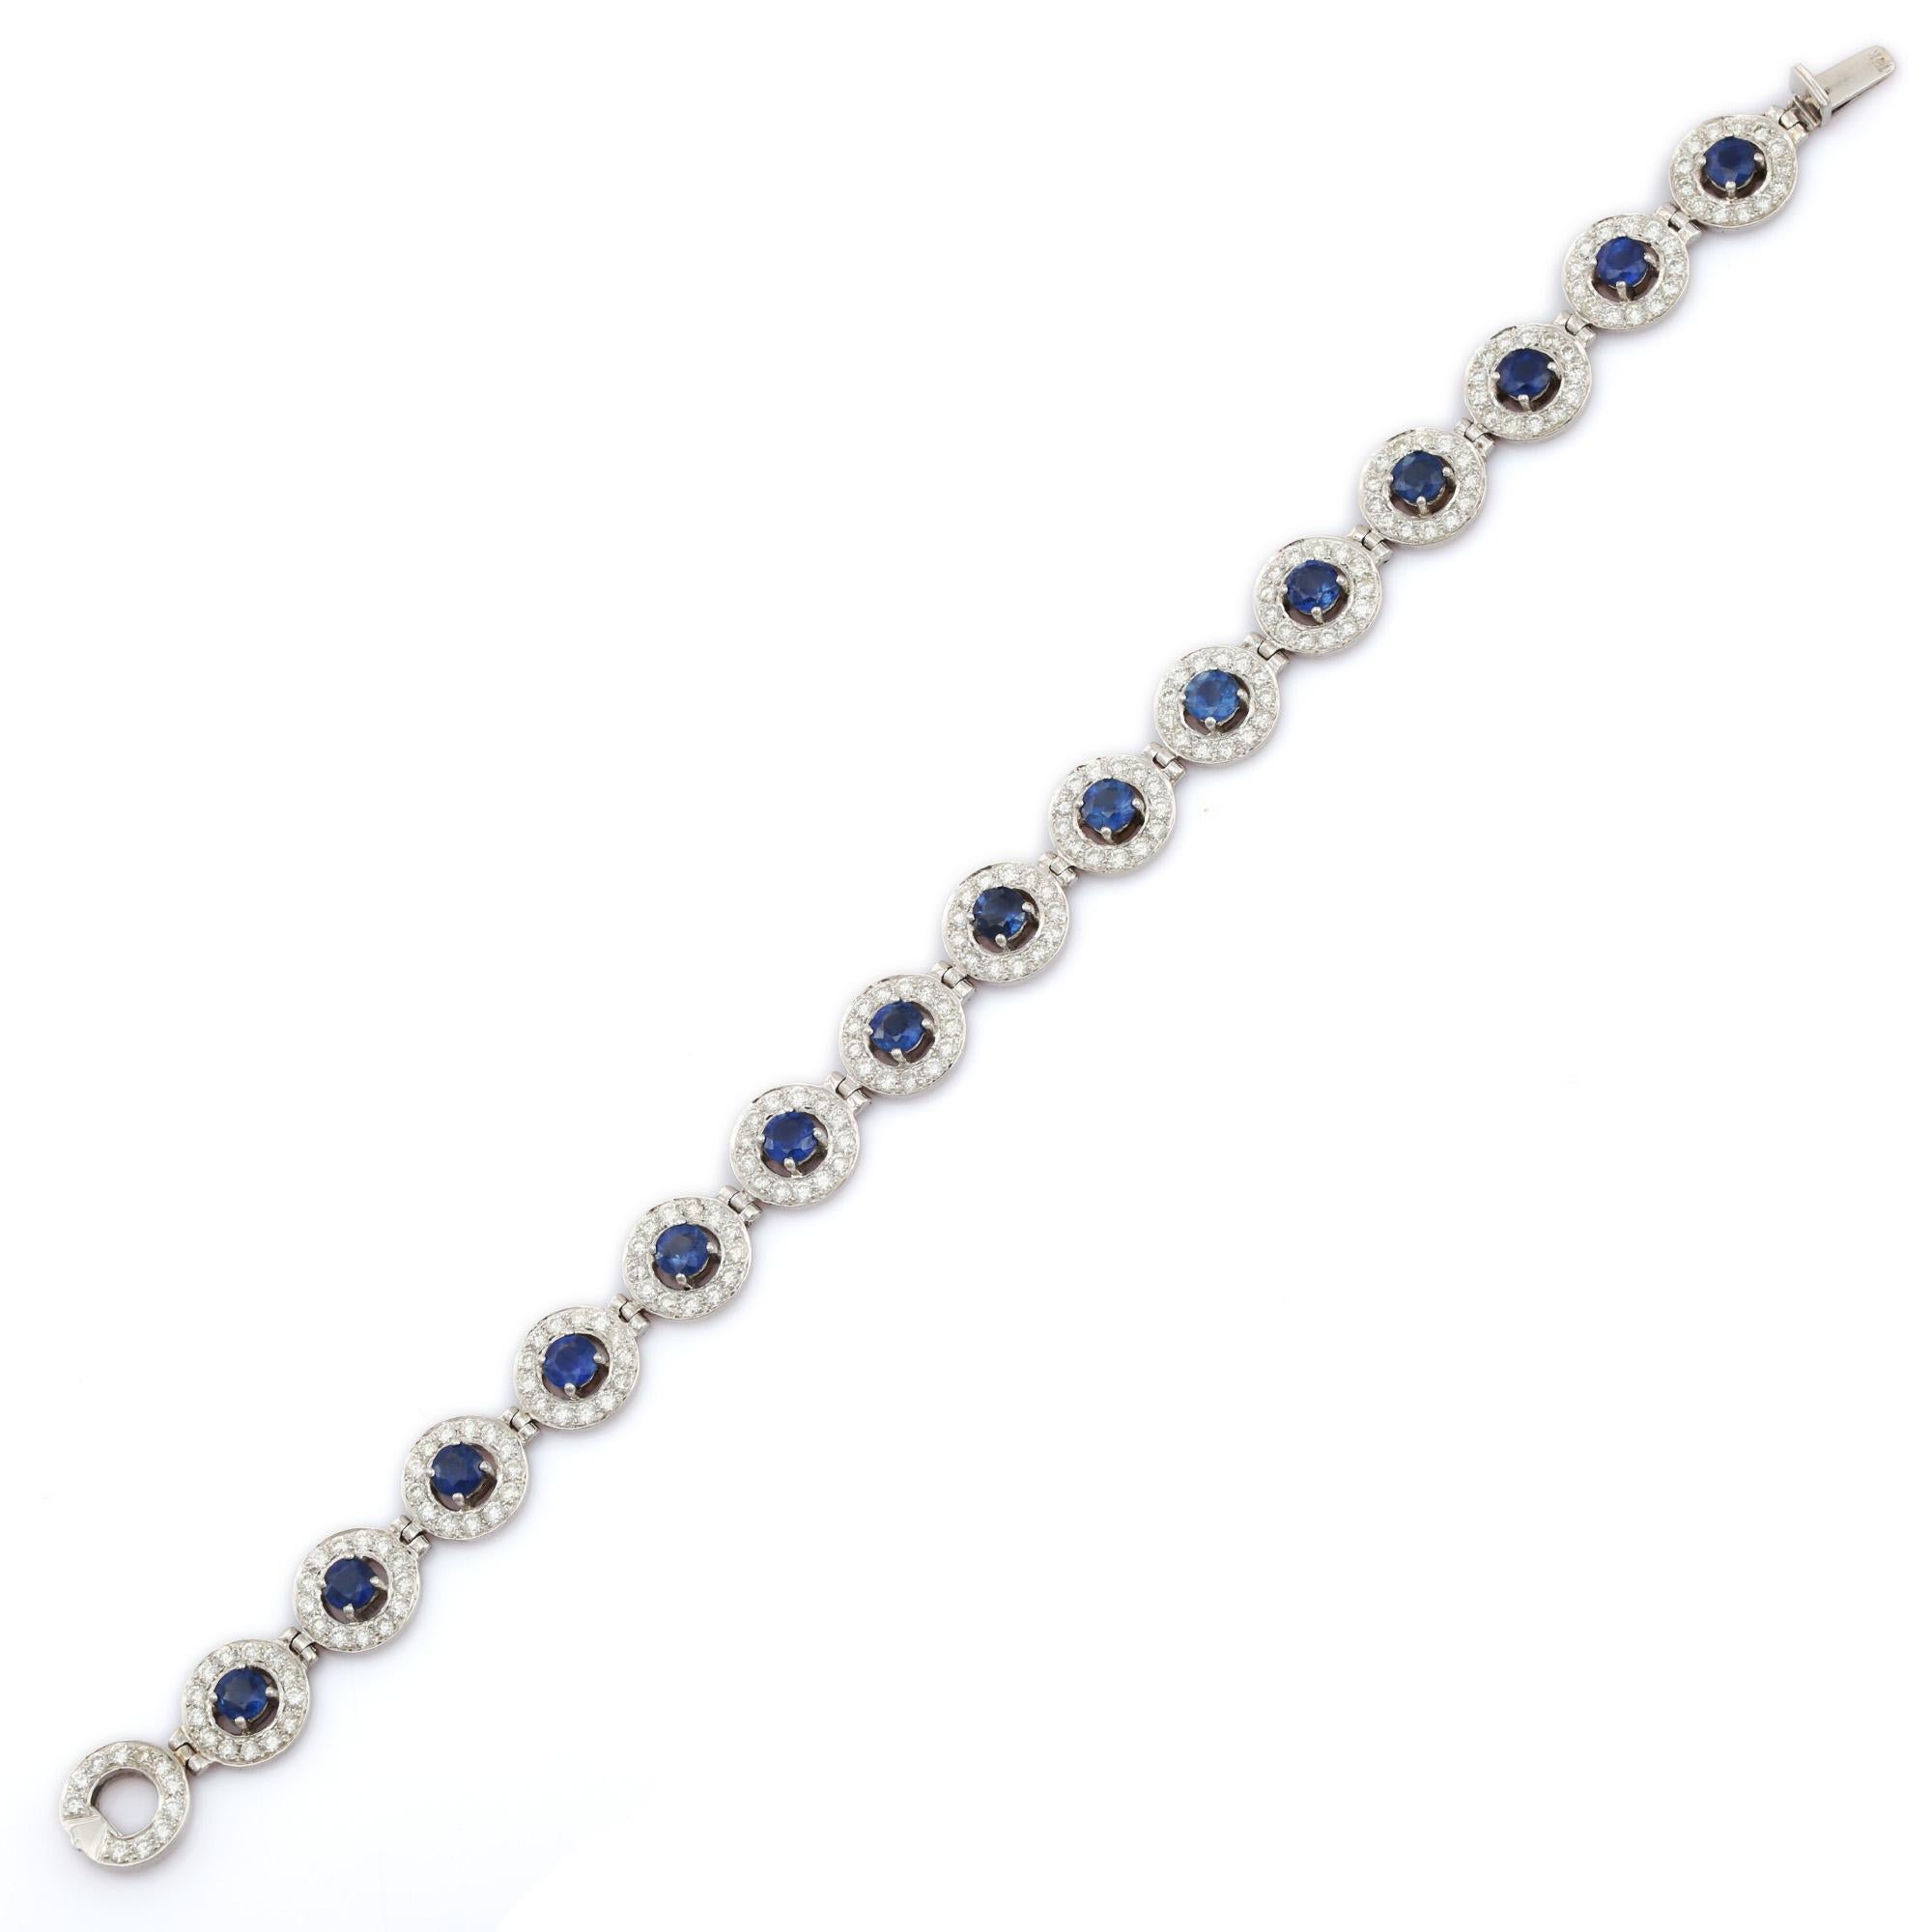 Blue Sapphire Wedding Bracelet with Halo Diamonds in 18K White Gold  In New Condition For Sale In Houston, TX